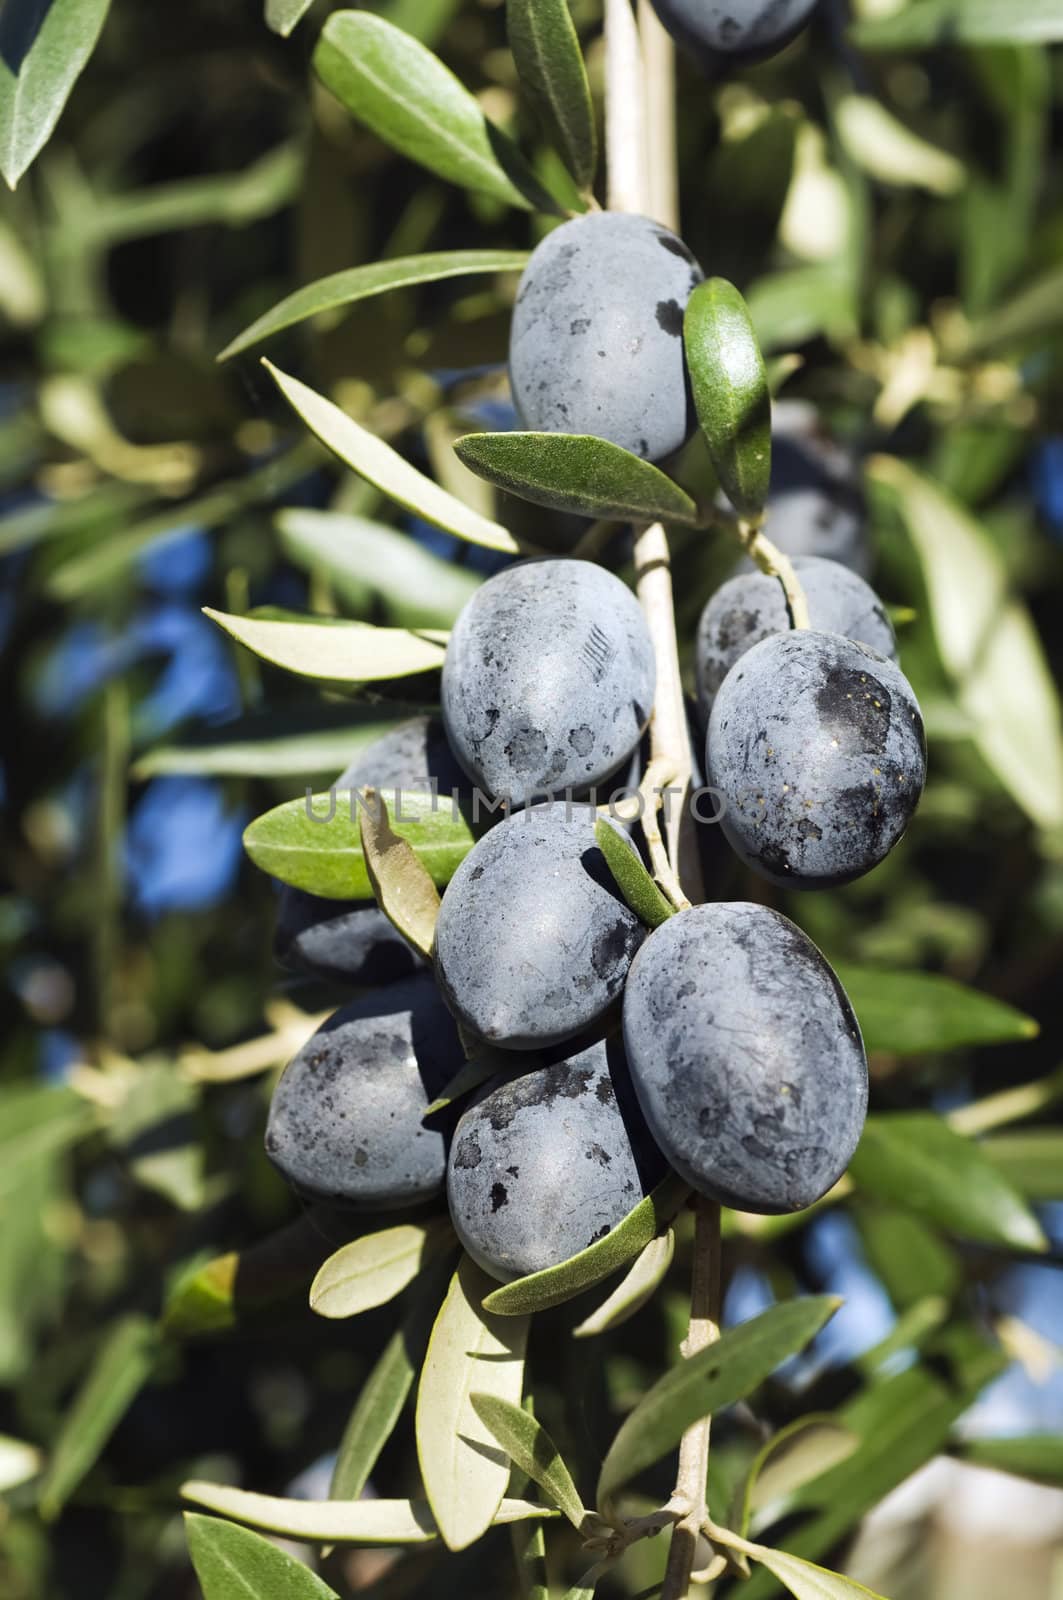 A bunch of delicious fresh unpicked black olives hanging on the tree in sunshine in nature outdoors ready to harvest